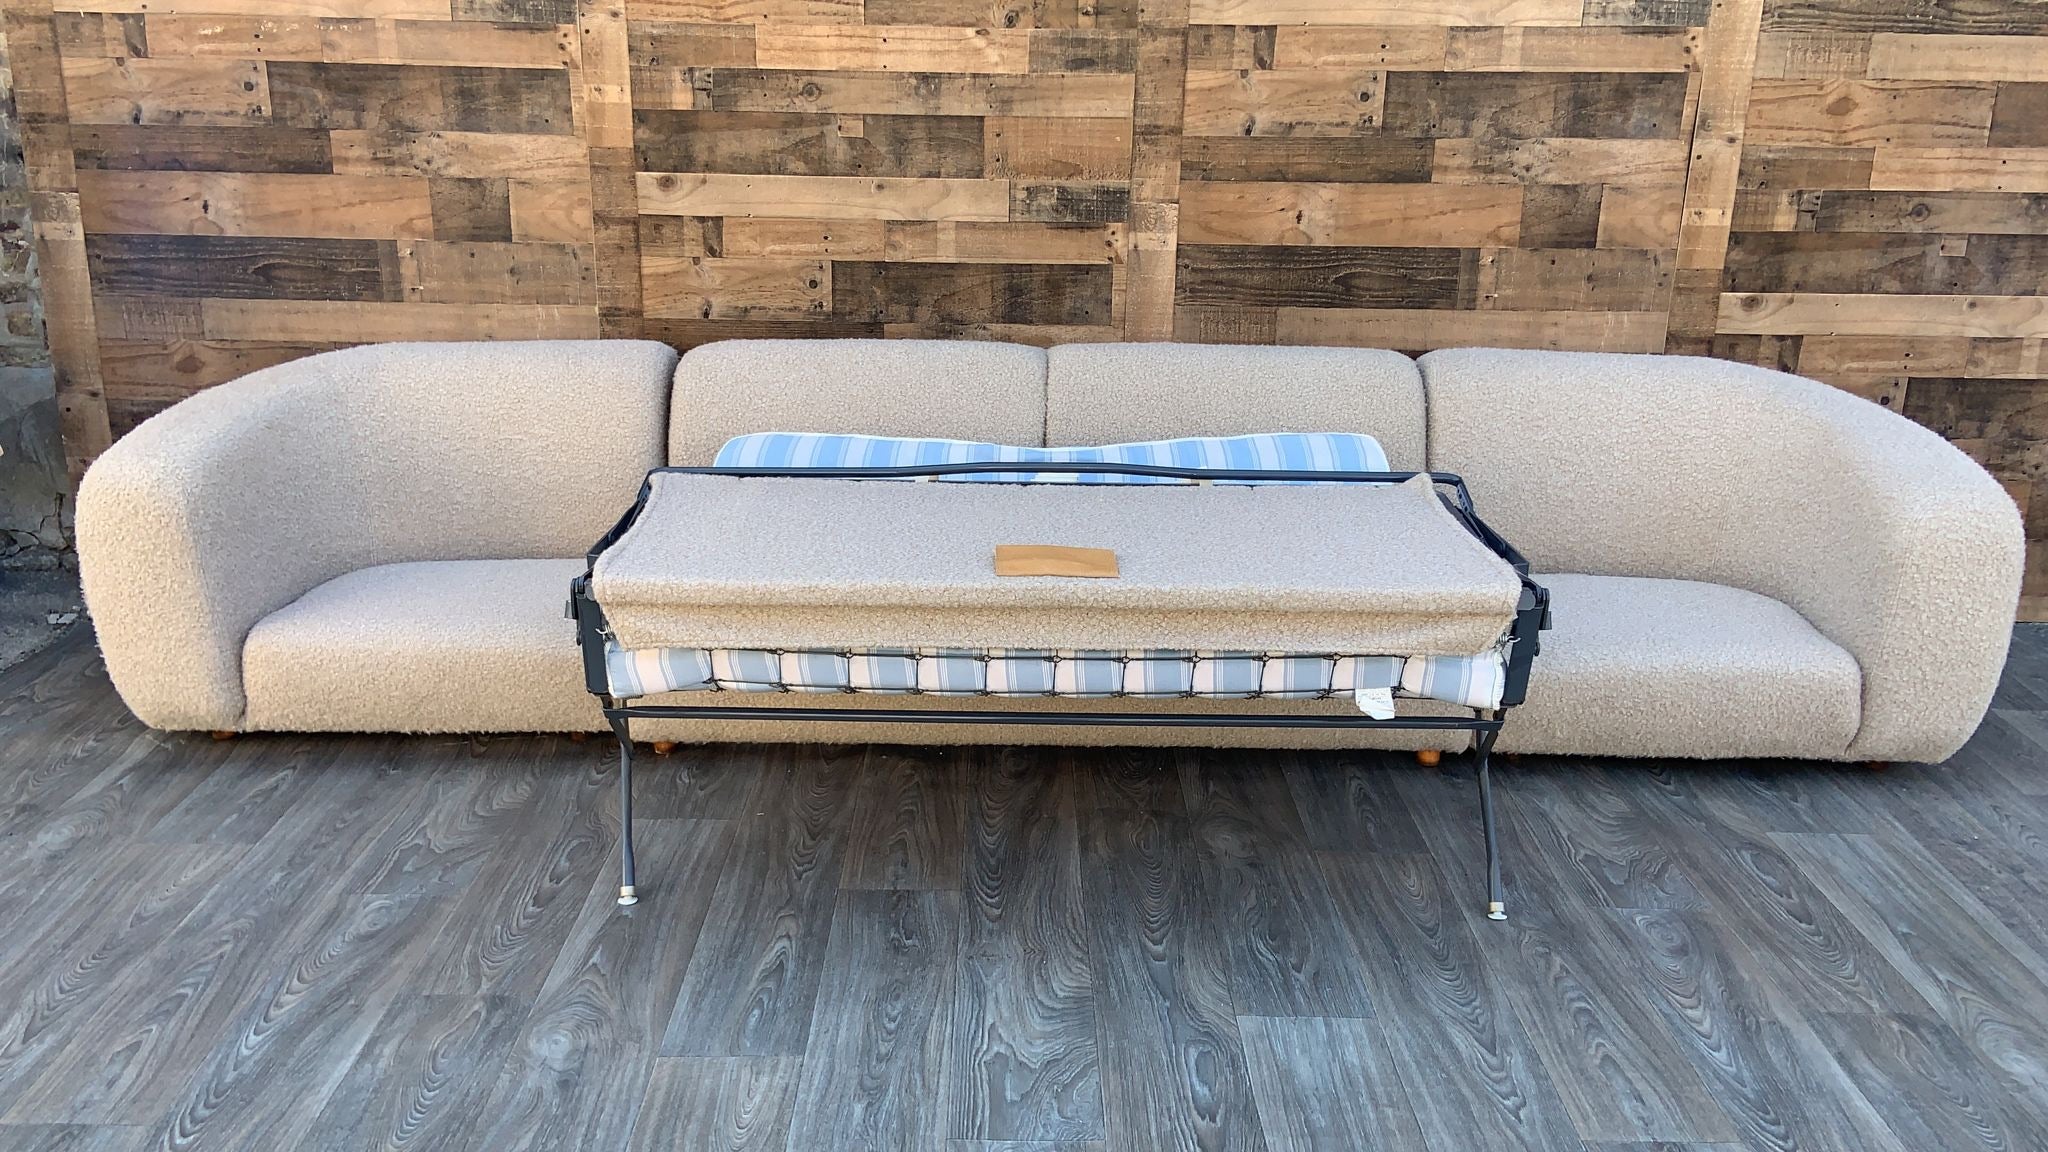 Vintage Mid Century Modern Karpen Sofa with Pullout Bed Retro Chic Furniture Set with Newly Upholstered Cushions